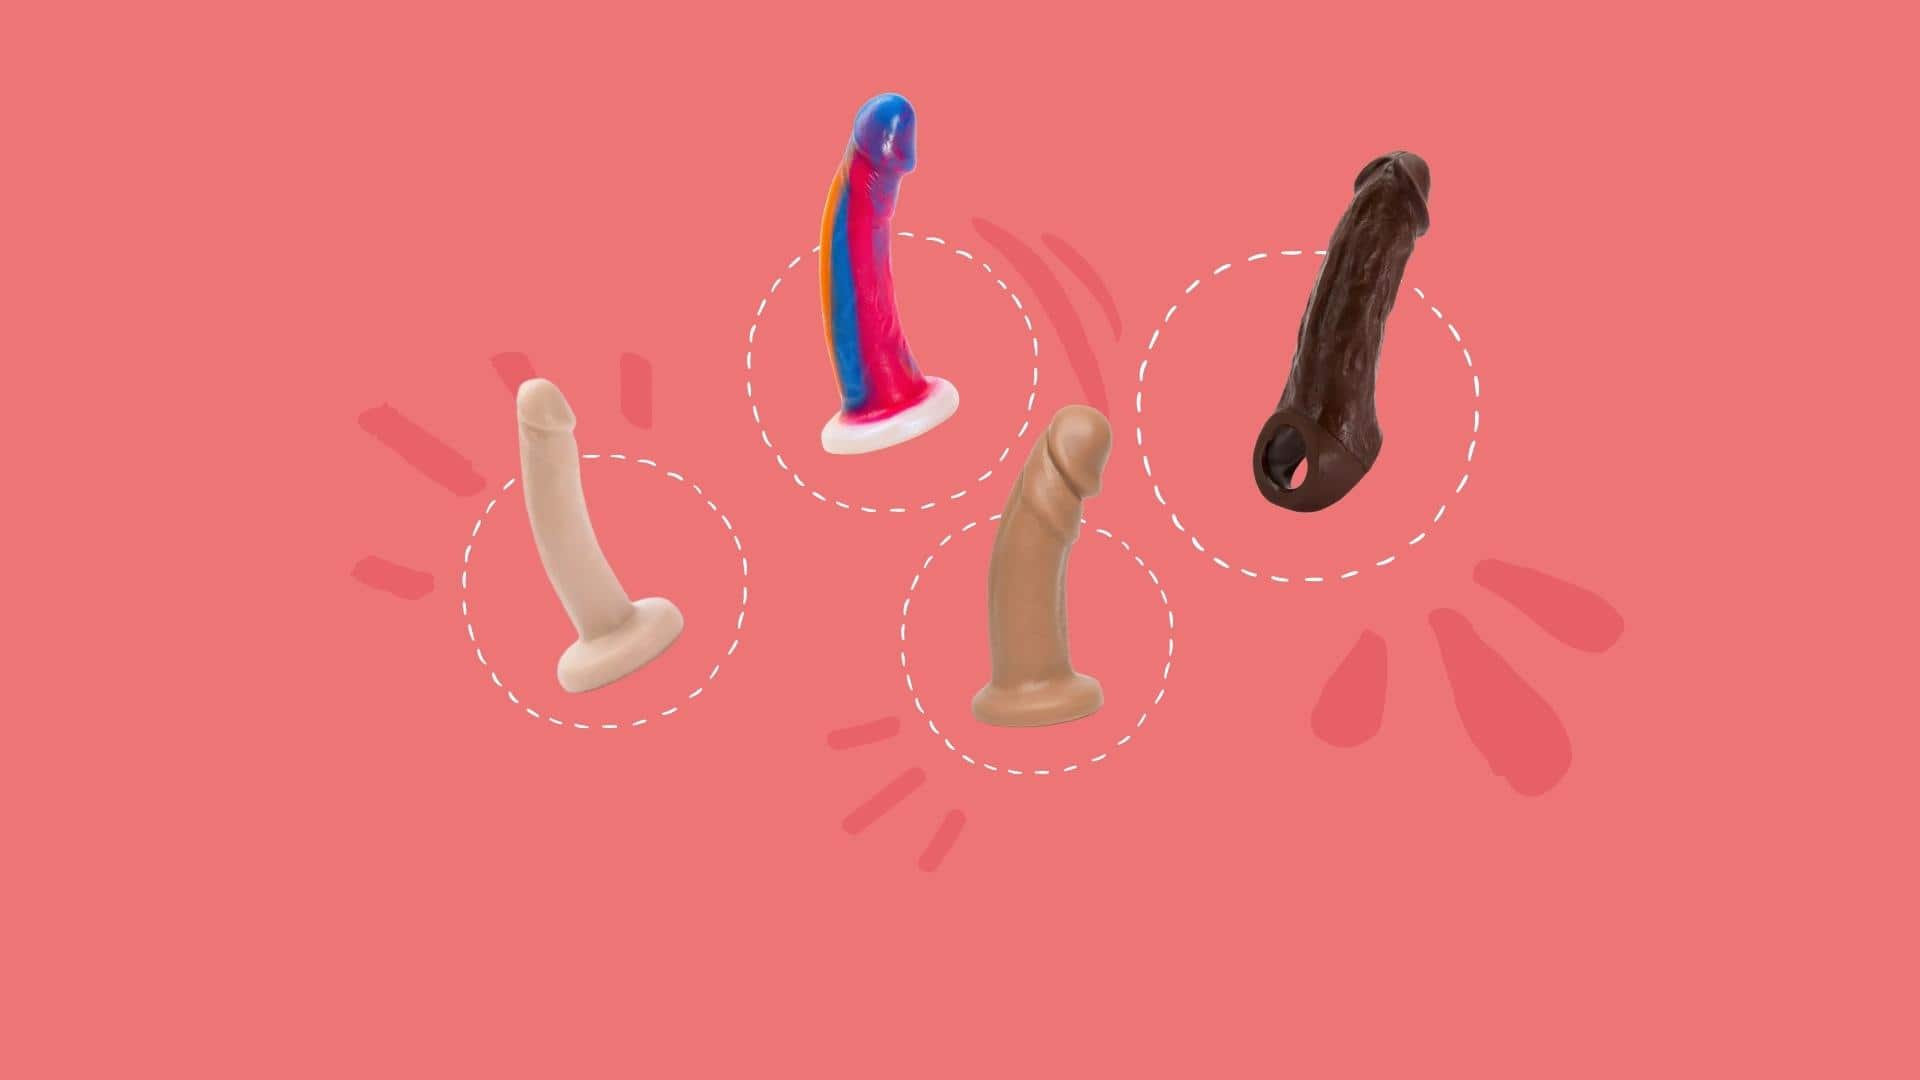 Vixen – The 10 Best and Most Realistic Dildos